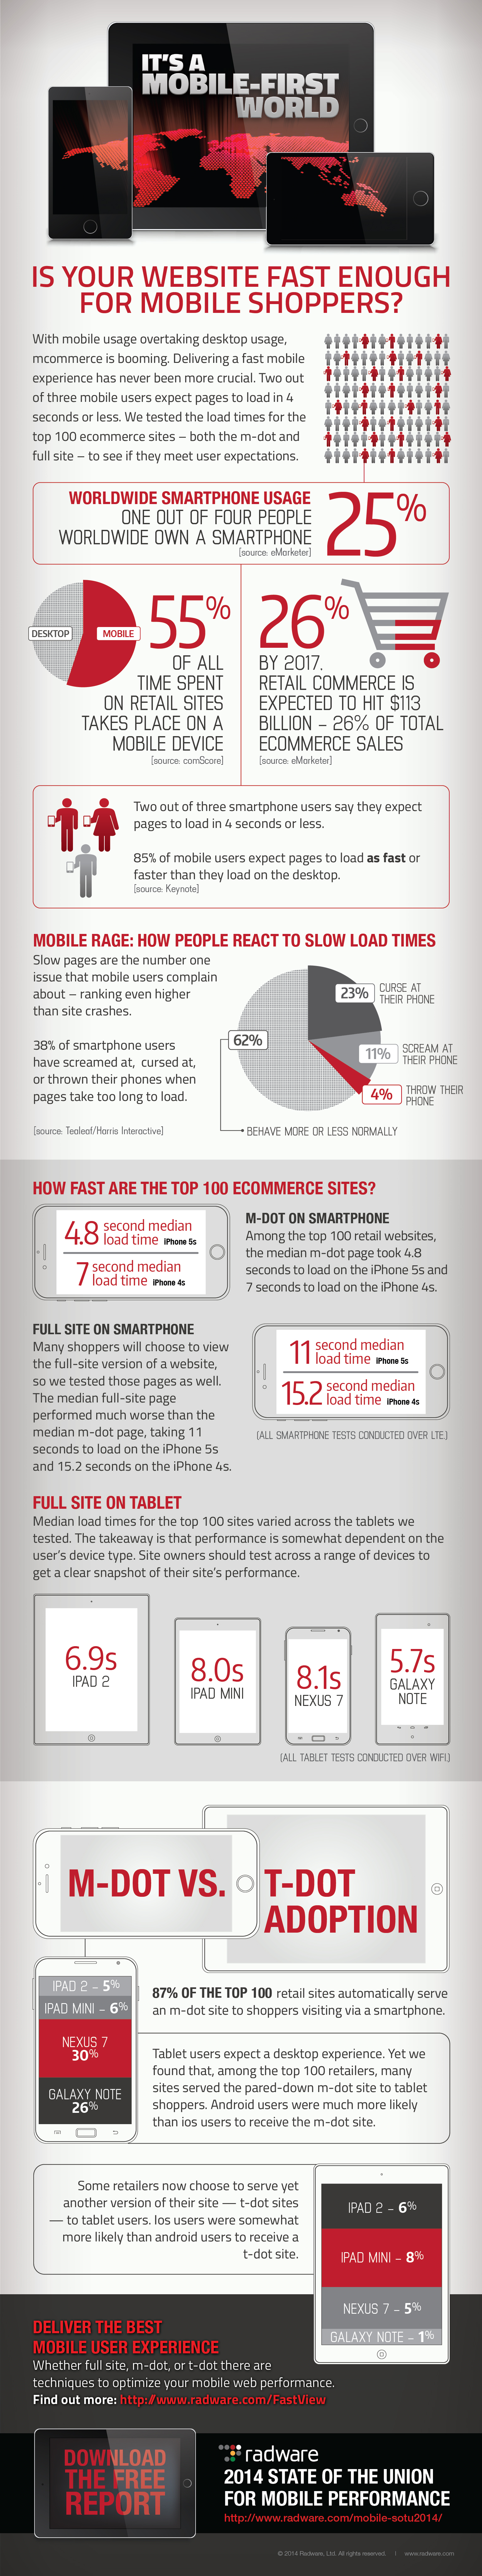 2014 State of the Union: Mobile Ecommerce Performance Infographic